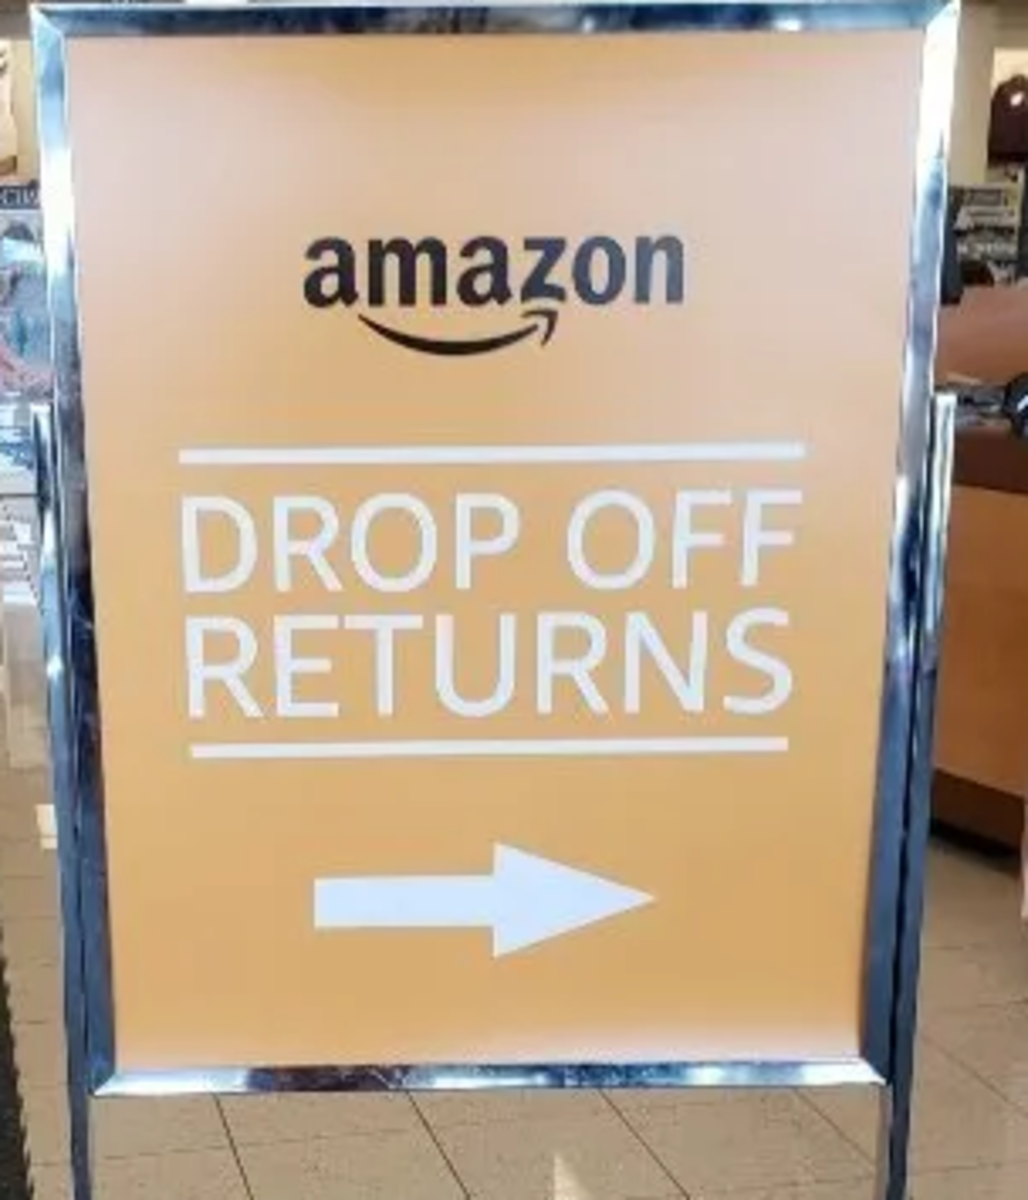 Amazon makes returns easy for many customers with Kohls and UPS stores as drop-off locations.